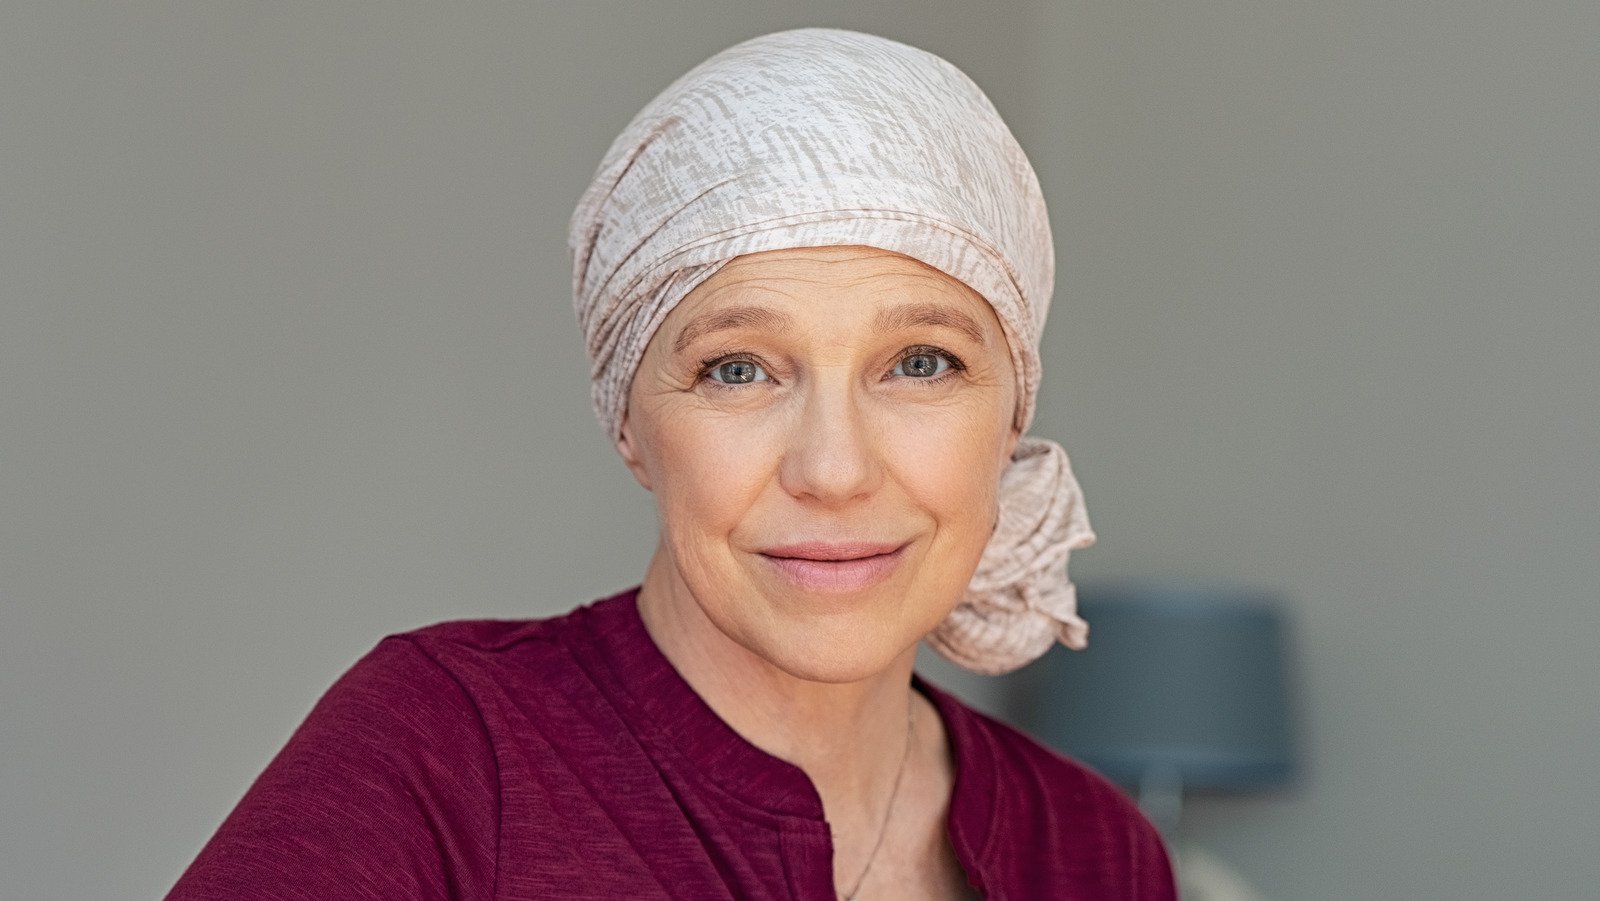 7 Foods To Eat And 7 To Avoid When Going Through Chemotherapy